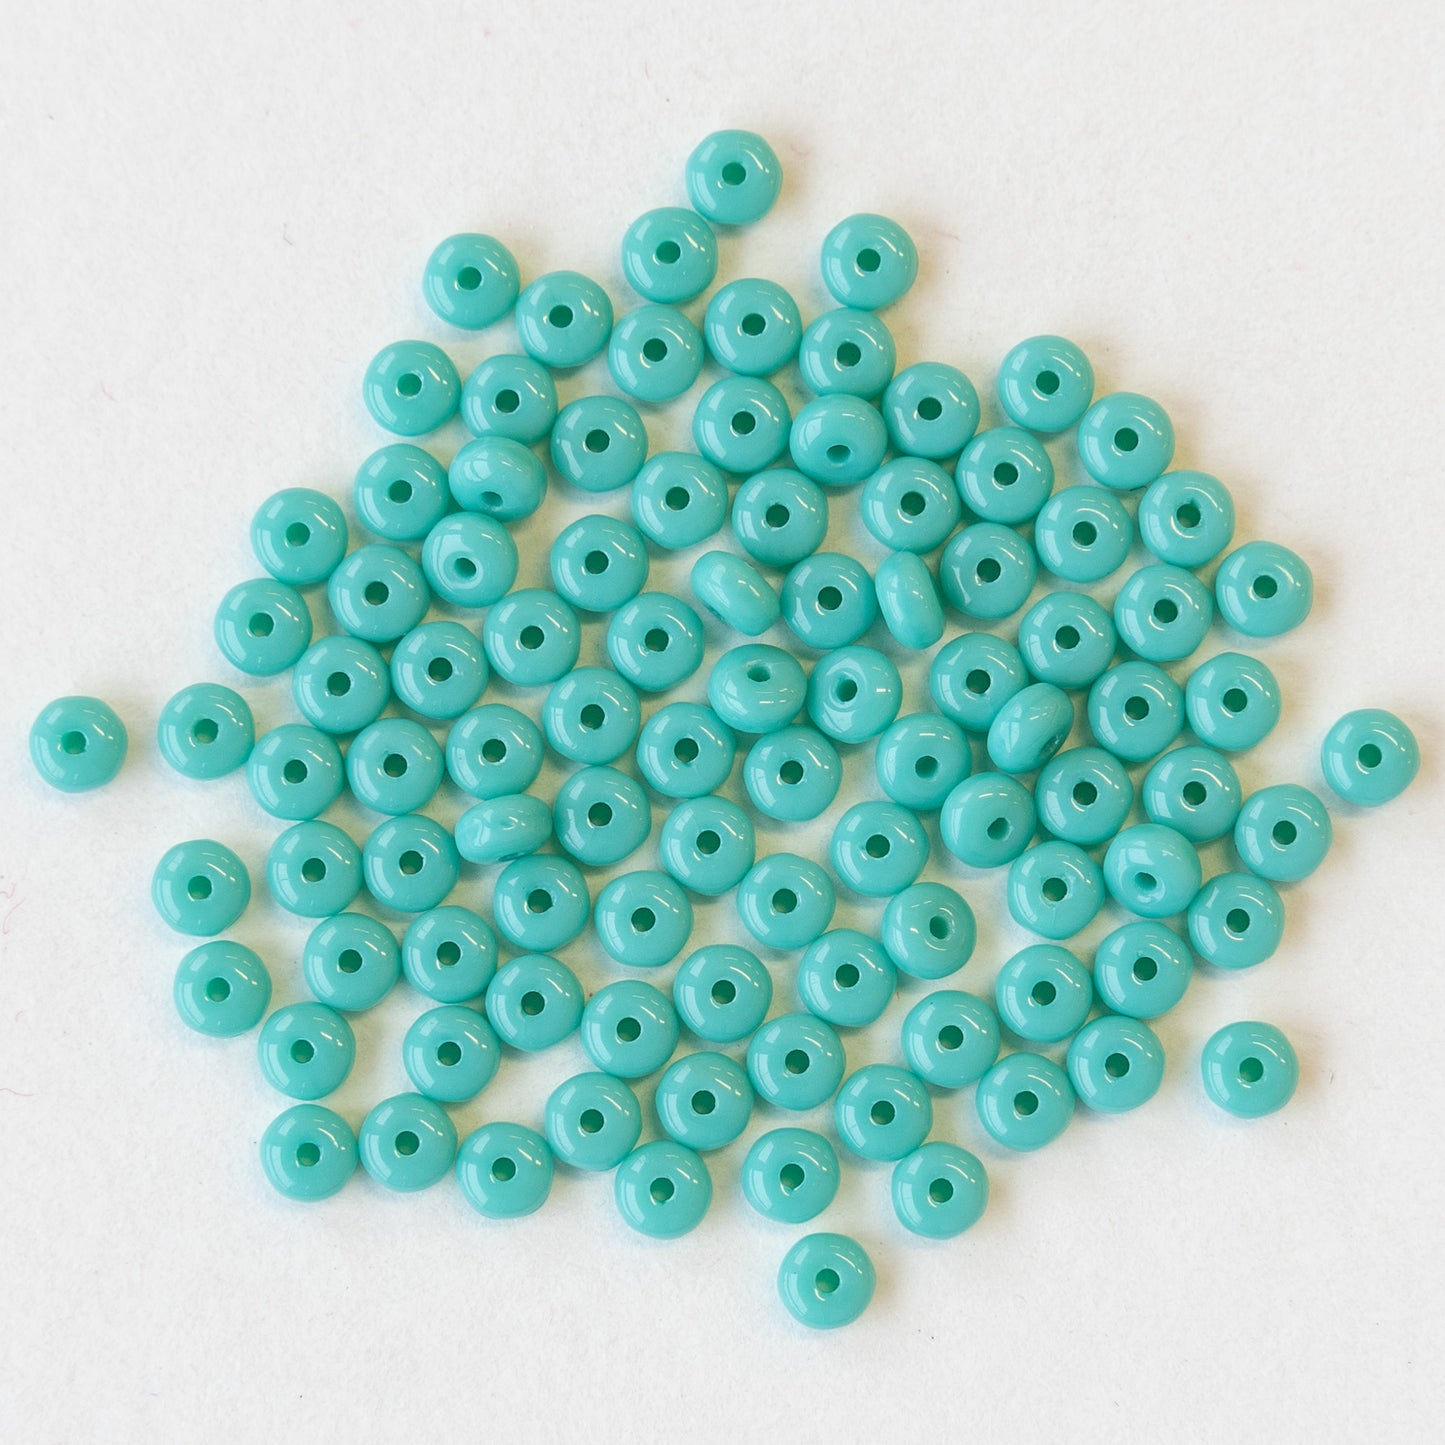 Load image into Gallery viewer, 3mm Rondelle Beads - Turquoise - 100 Beads
